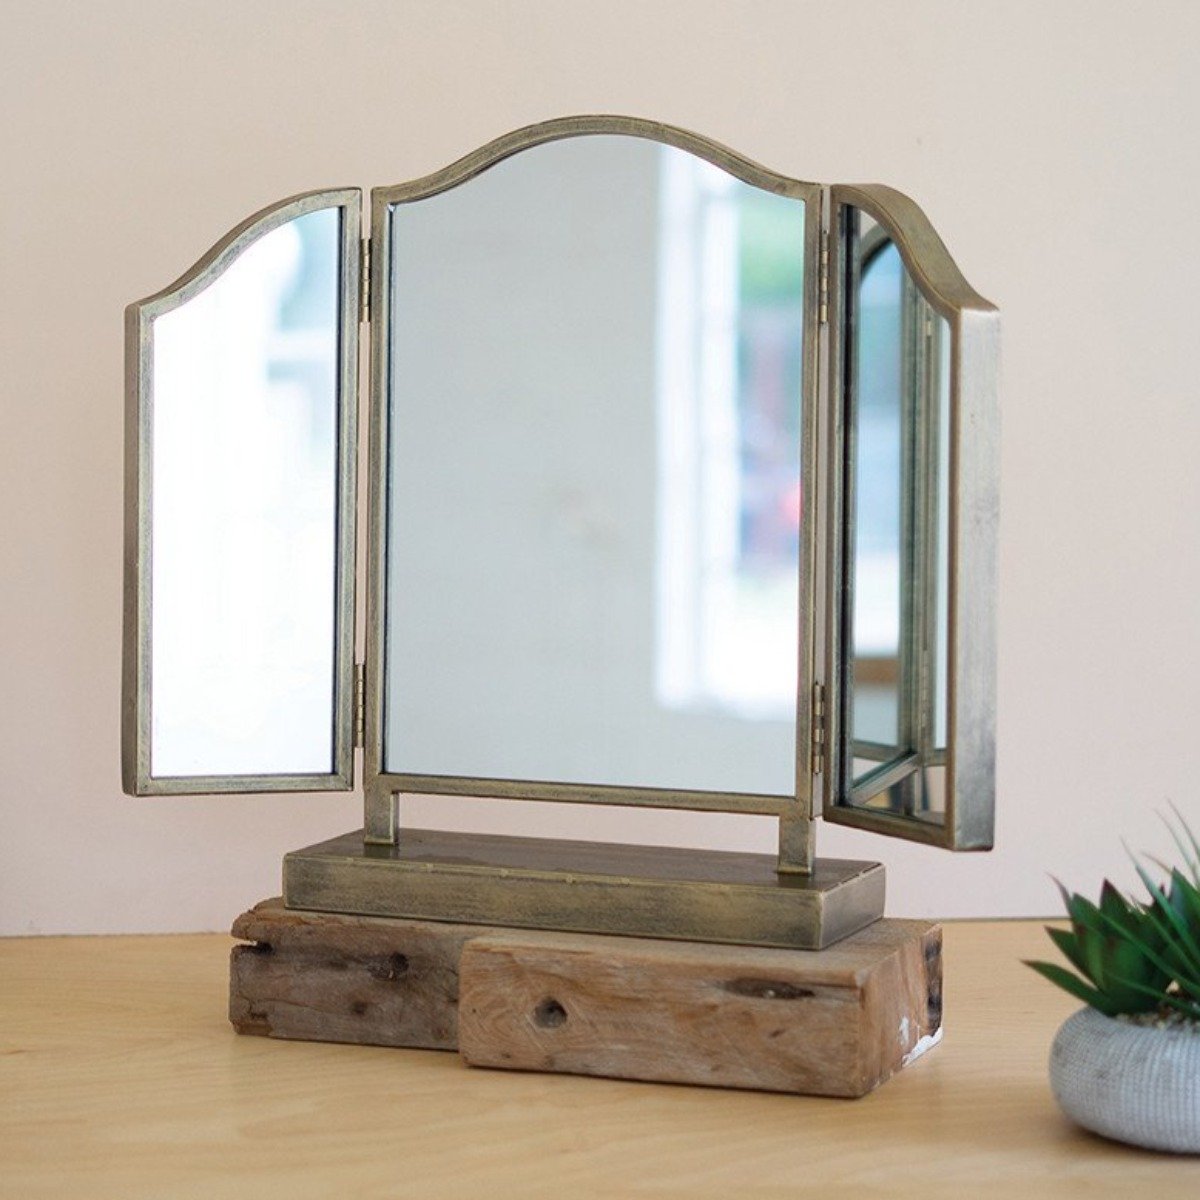 Table Mirror With Stand-Decor | Iron Accents